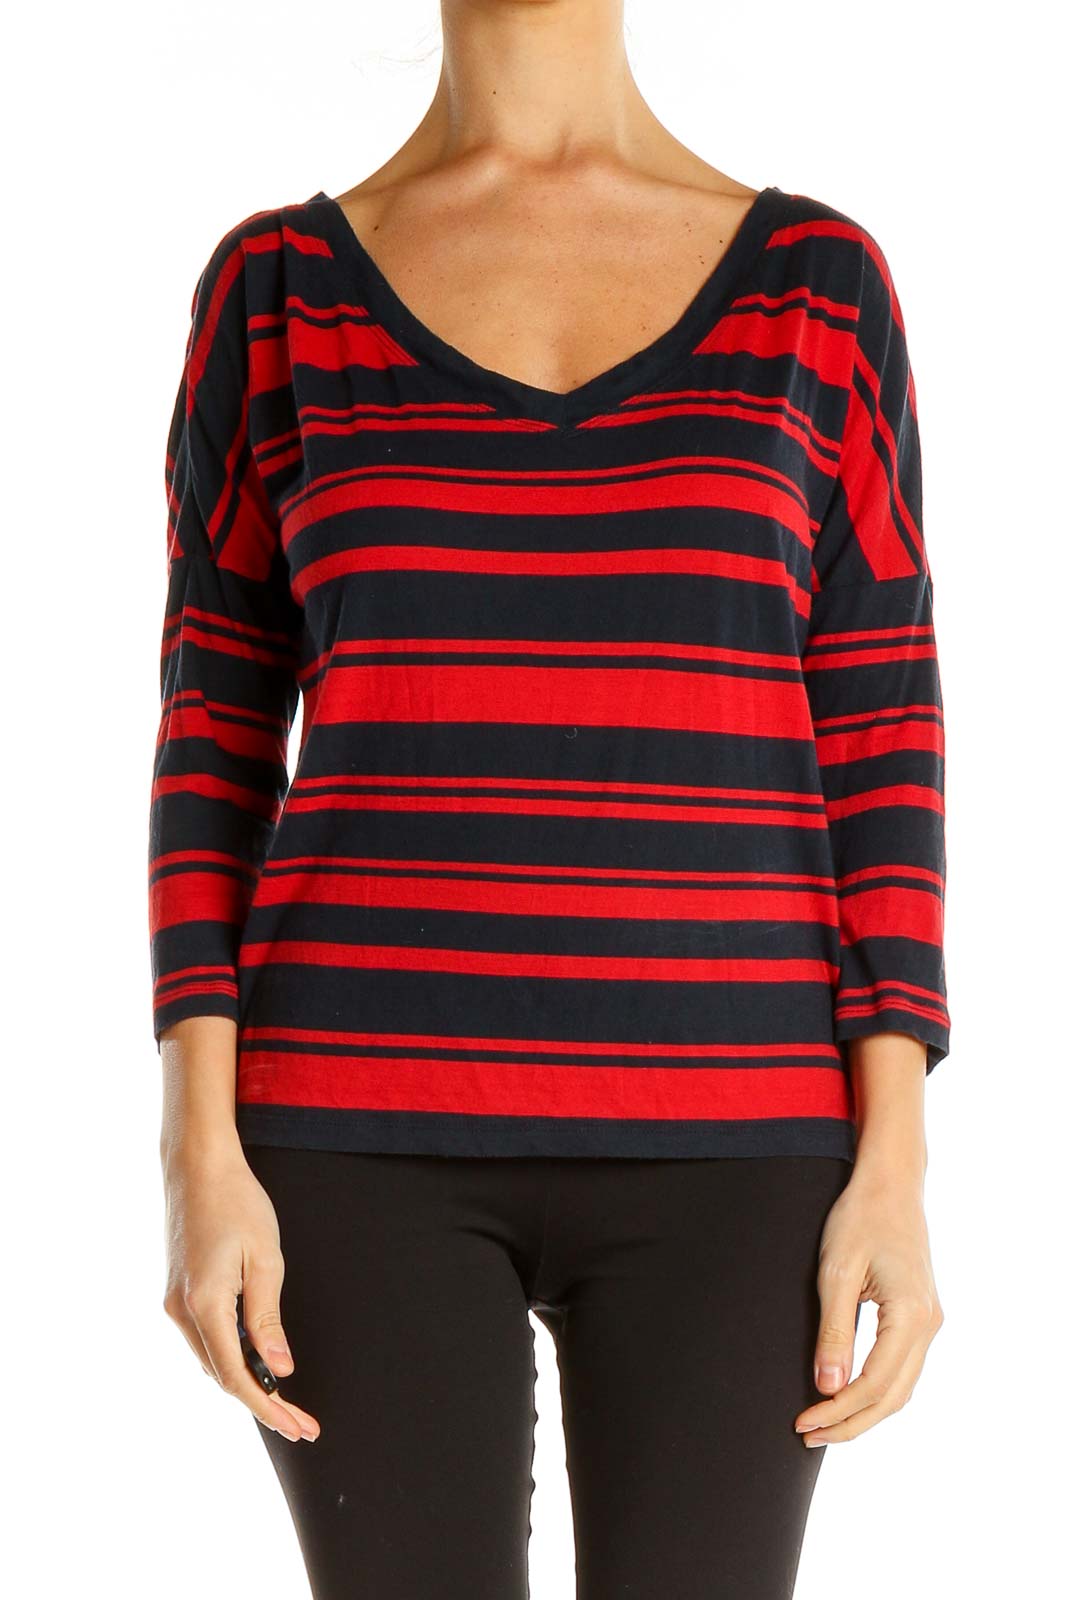 Red Striped Casual Top Front